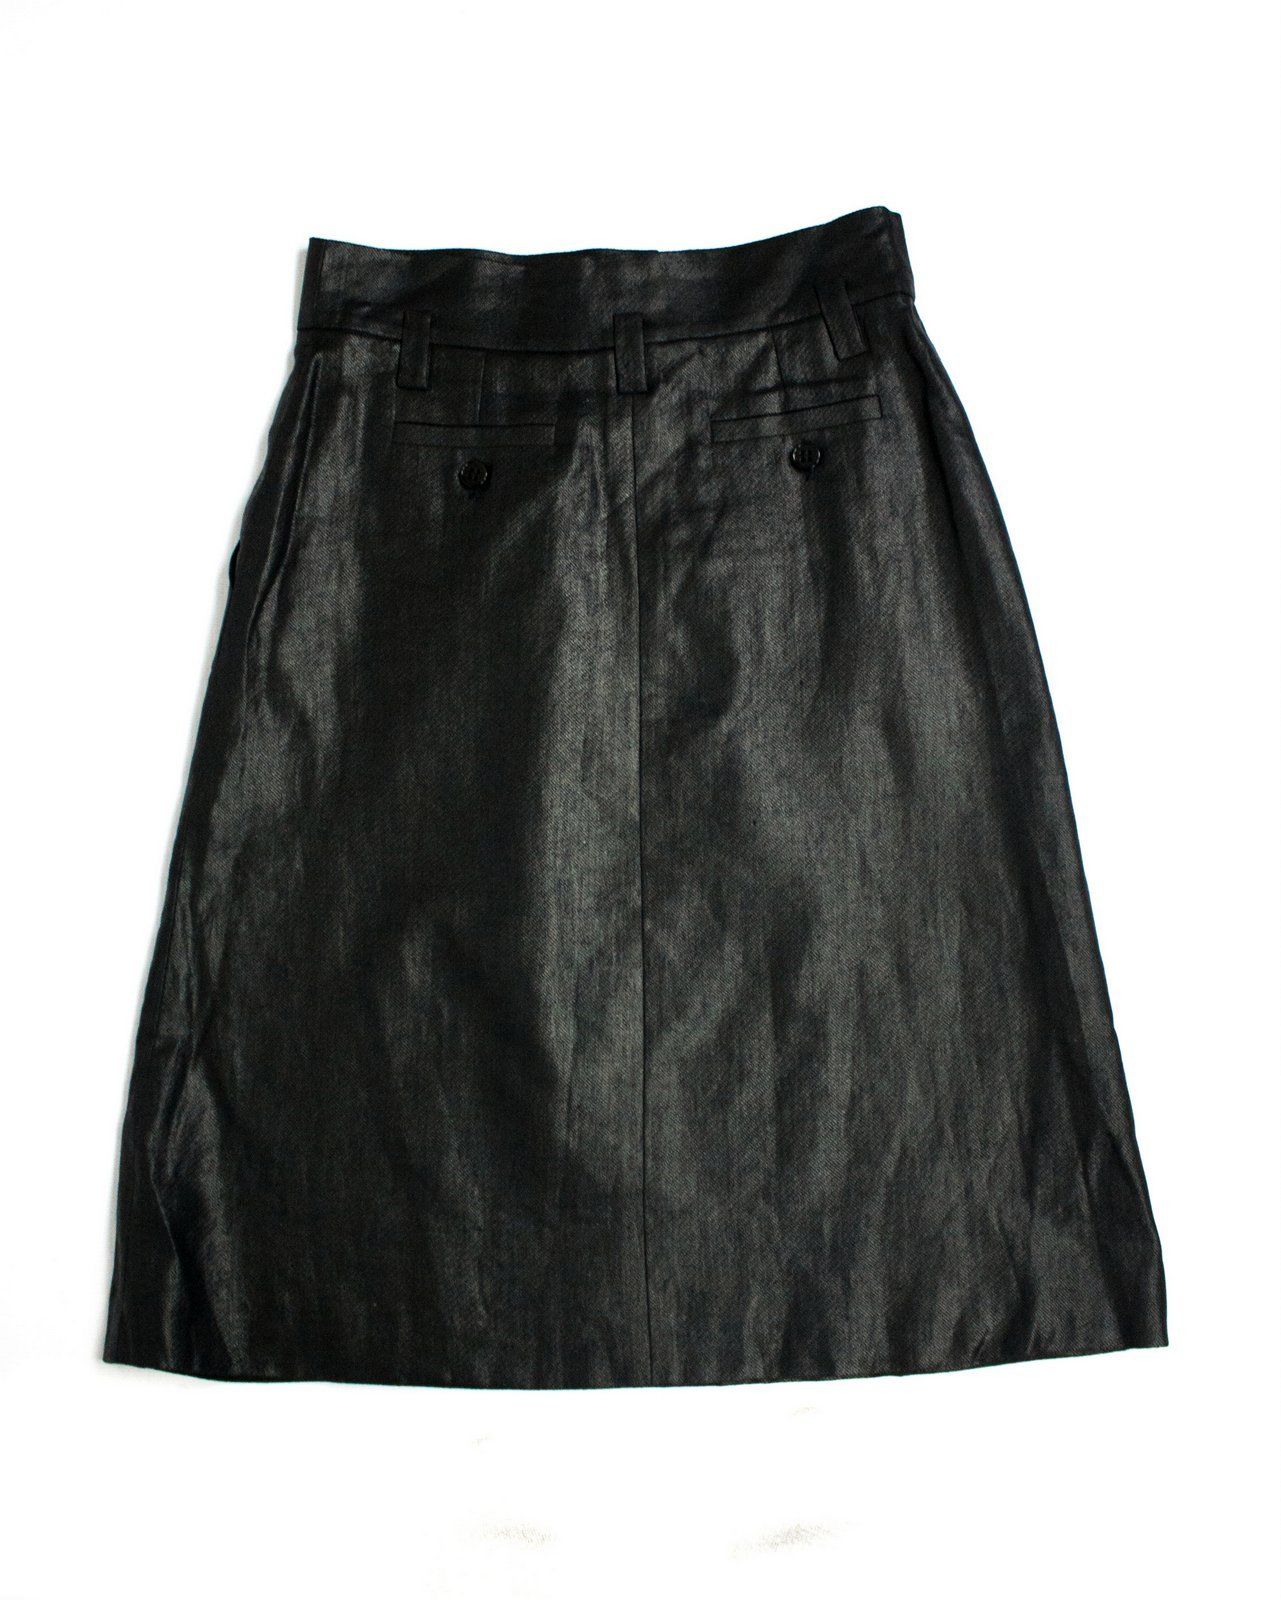 SONIA RYKIEL 100% linen A-line Black Skirt SIZE L, US 10 - secondfirst